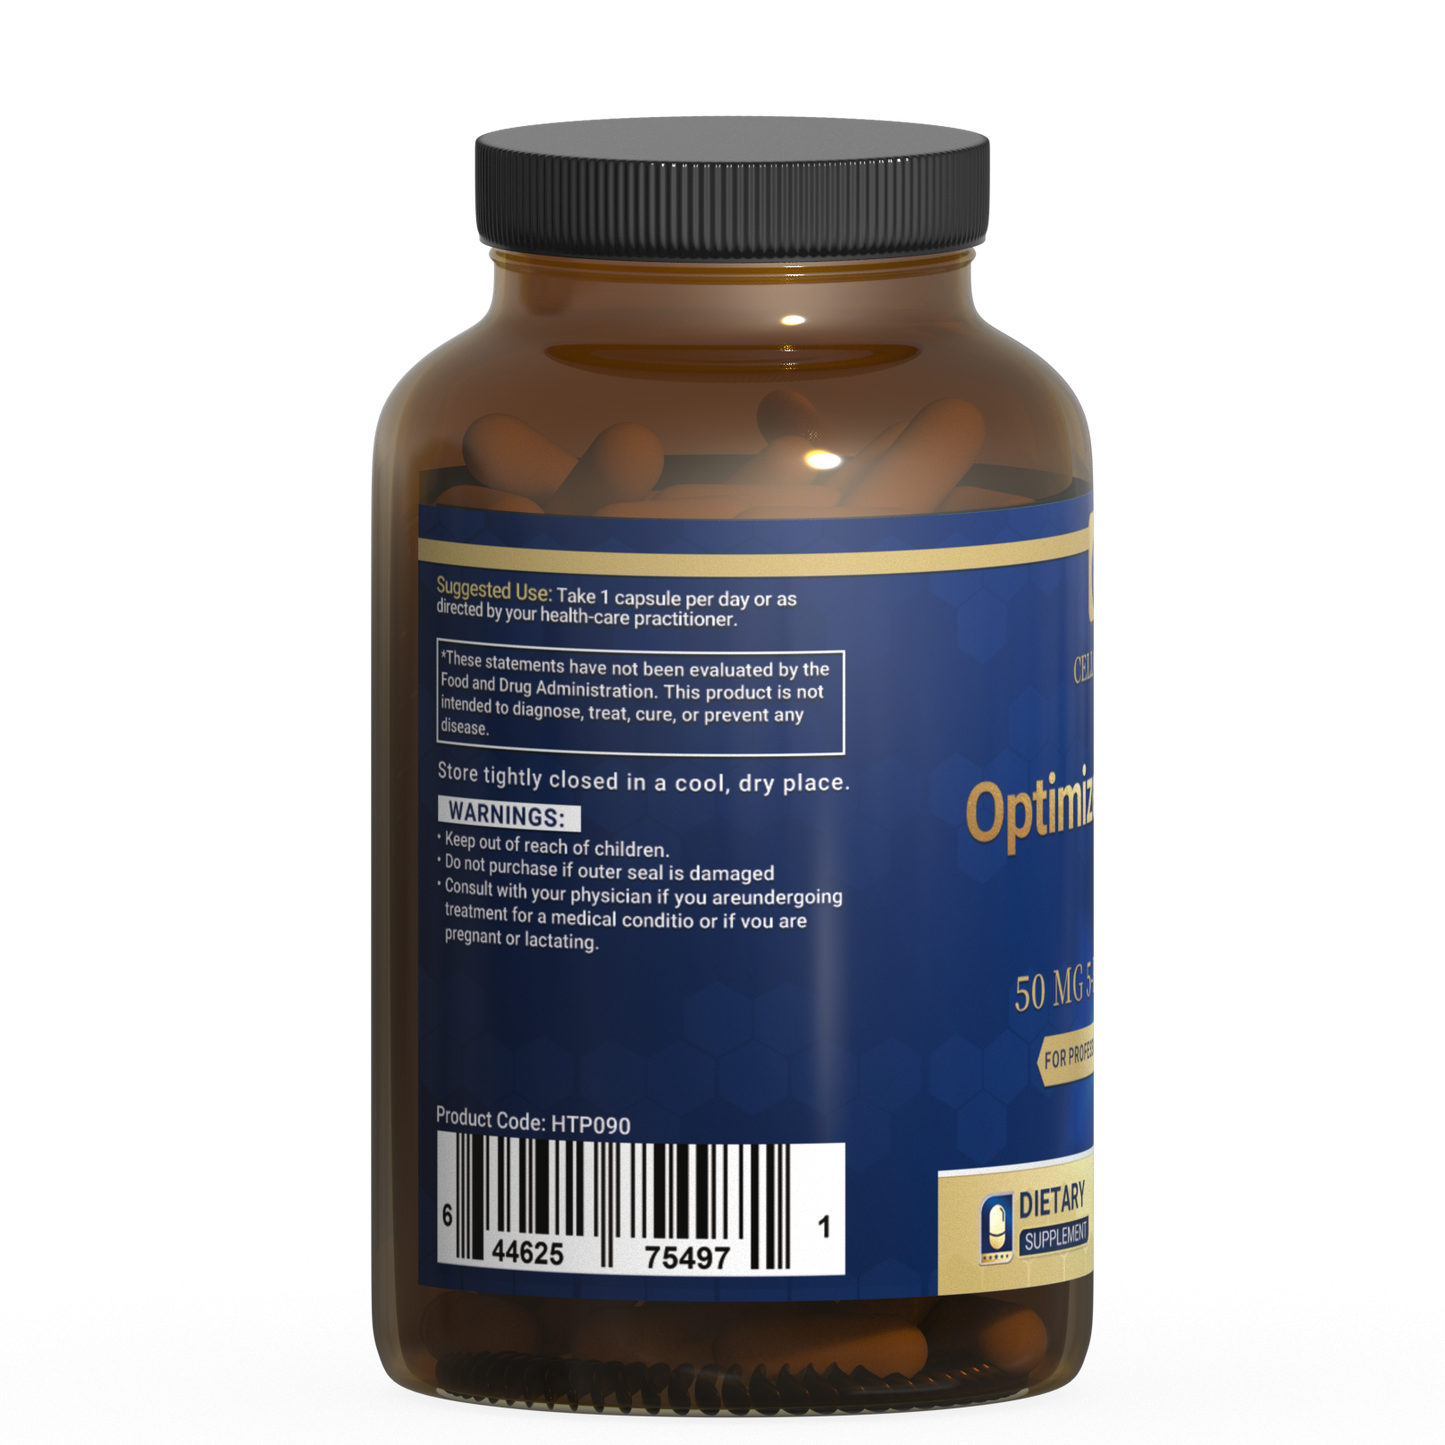 Optimized 5-HTP with Vitamin B6 (P-5-P)，Serotonin Support for Sleep and Stress Management